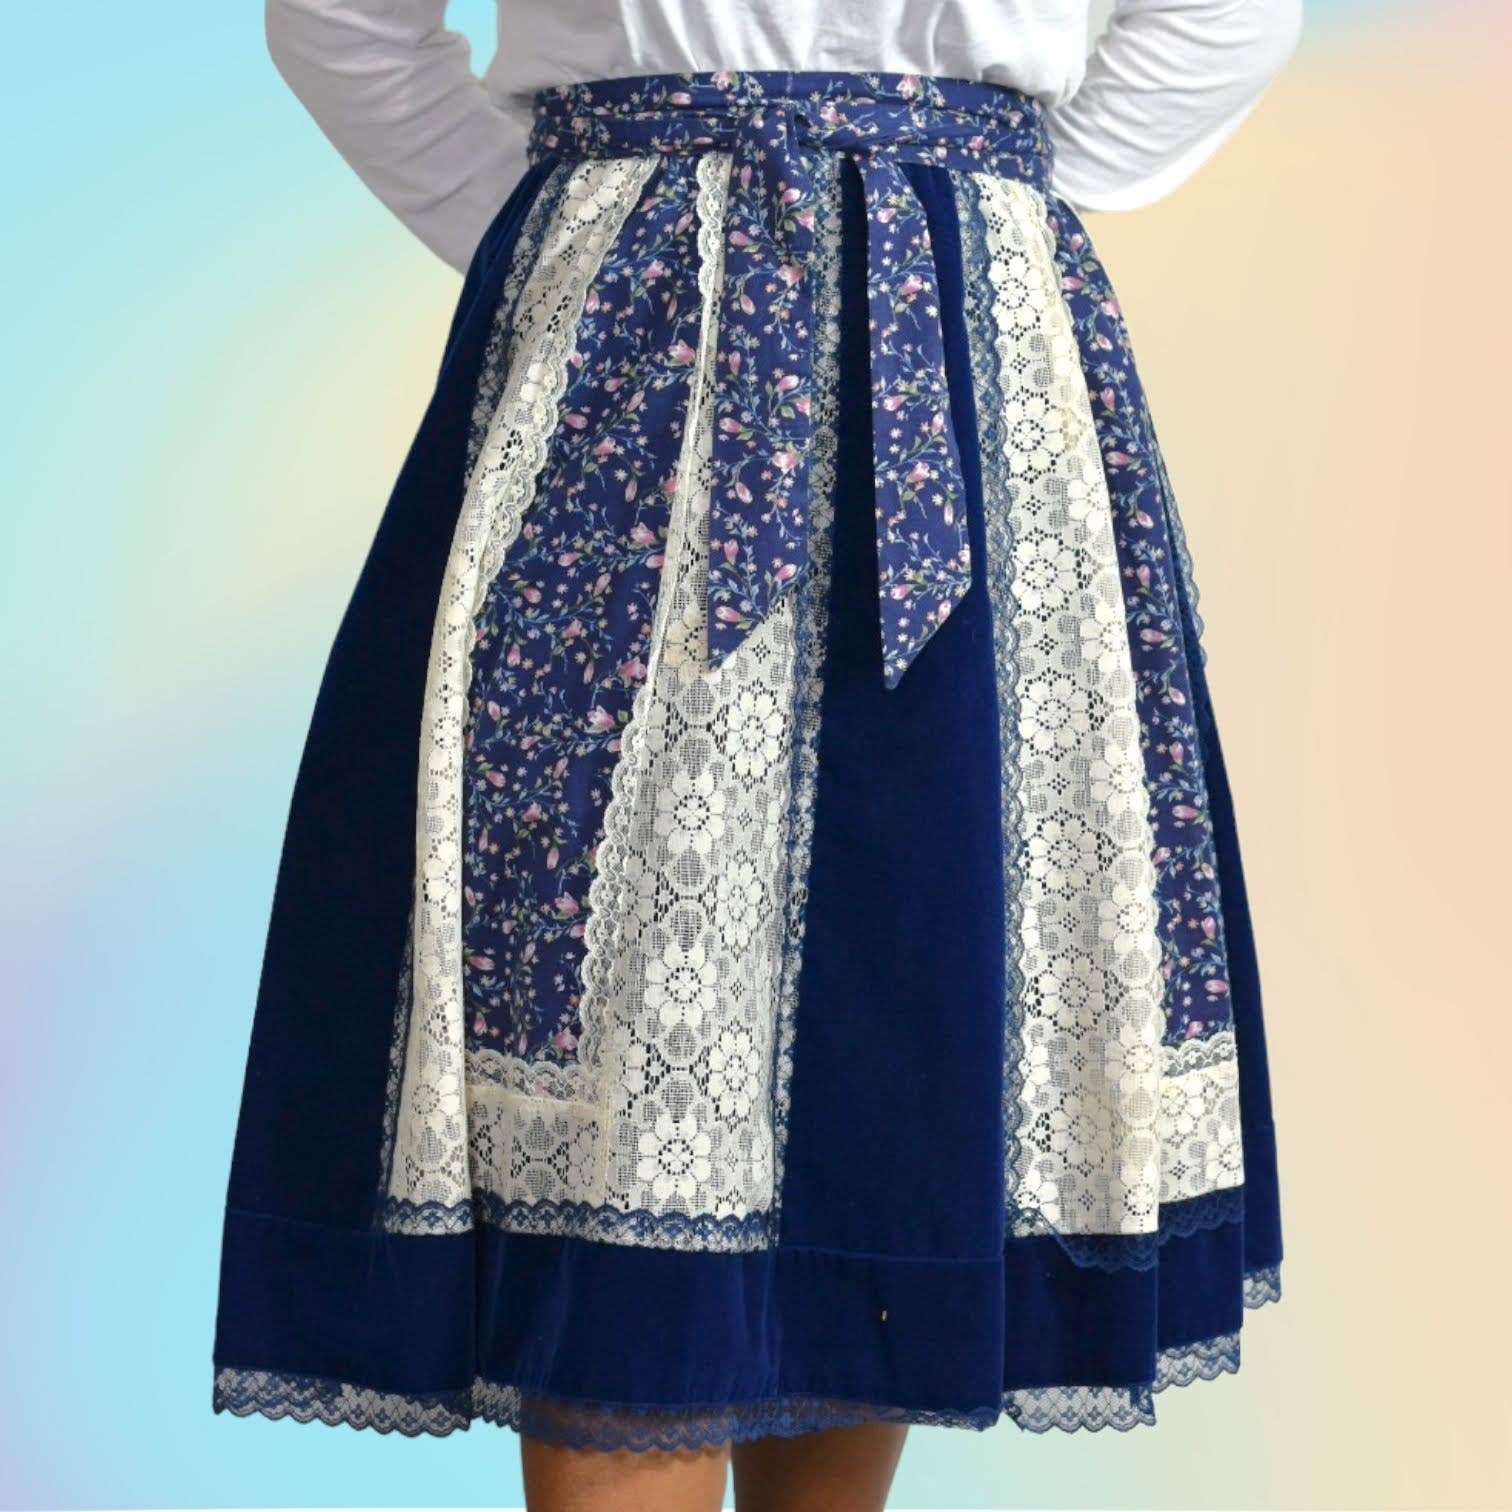 Carefree Fashions Vintage 70s Blue Velveteen Skirt Midi Patchwork Floral Lace Velvet Size Small